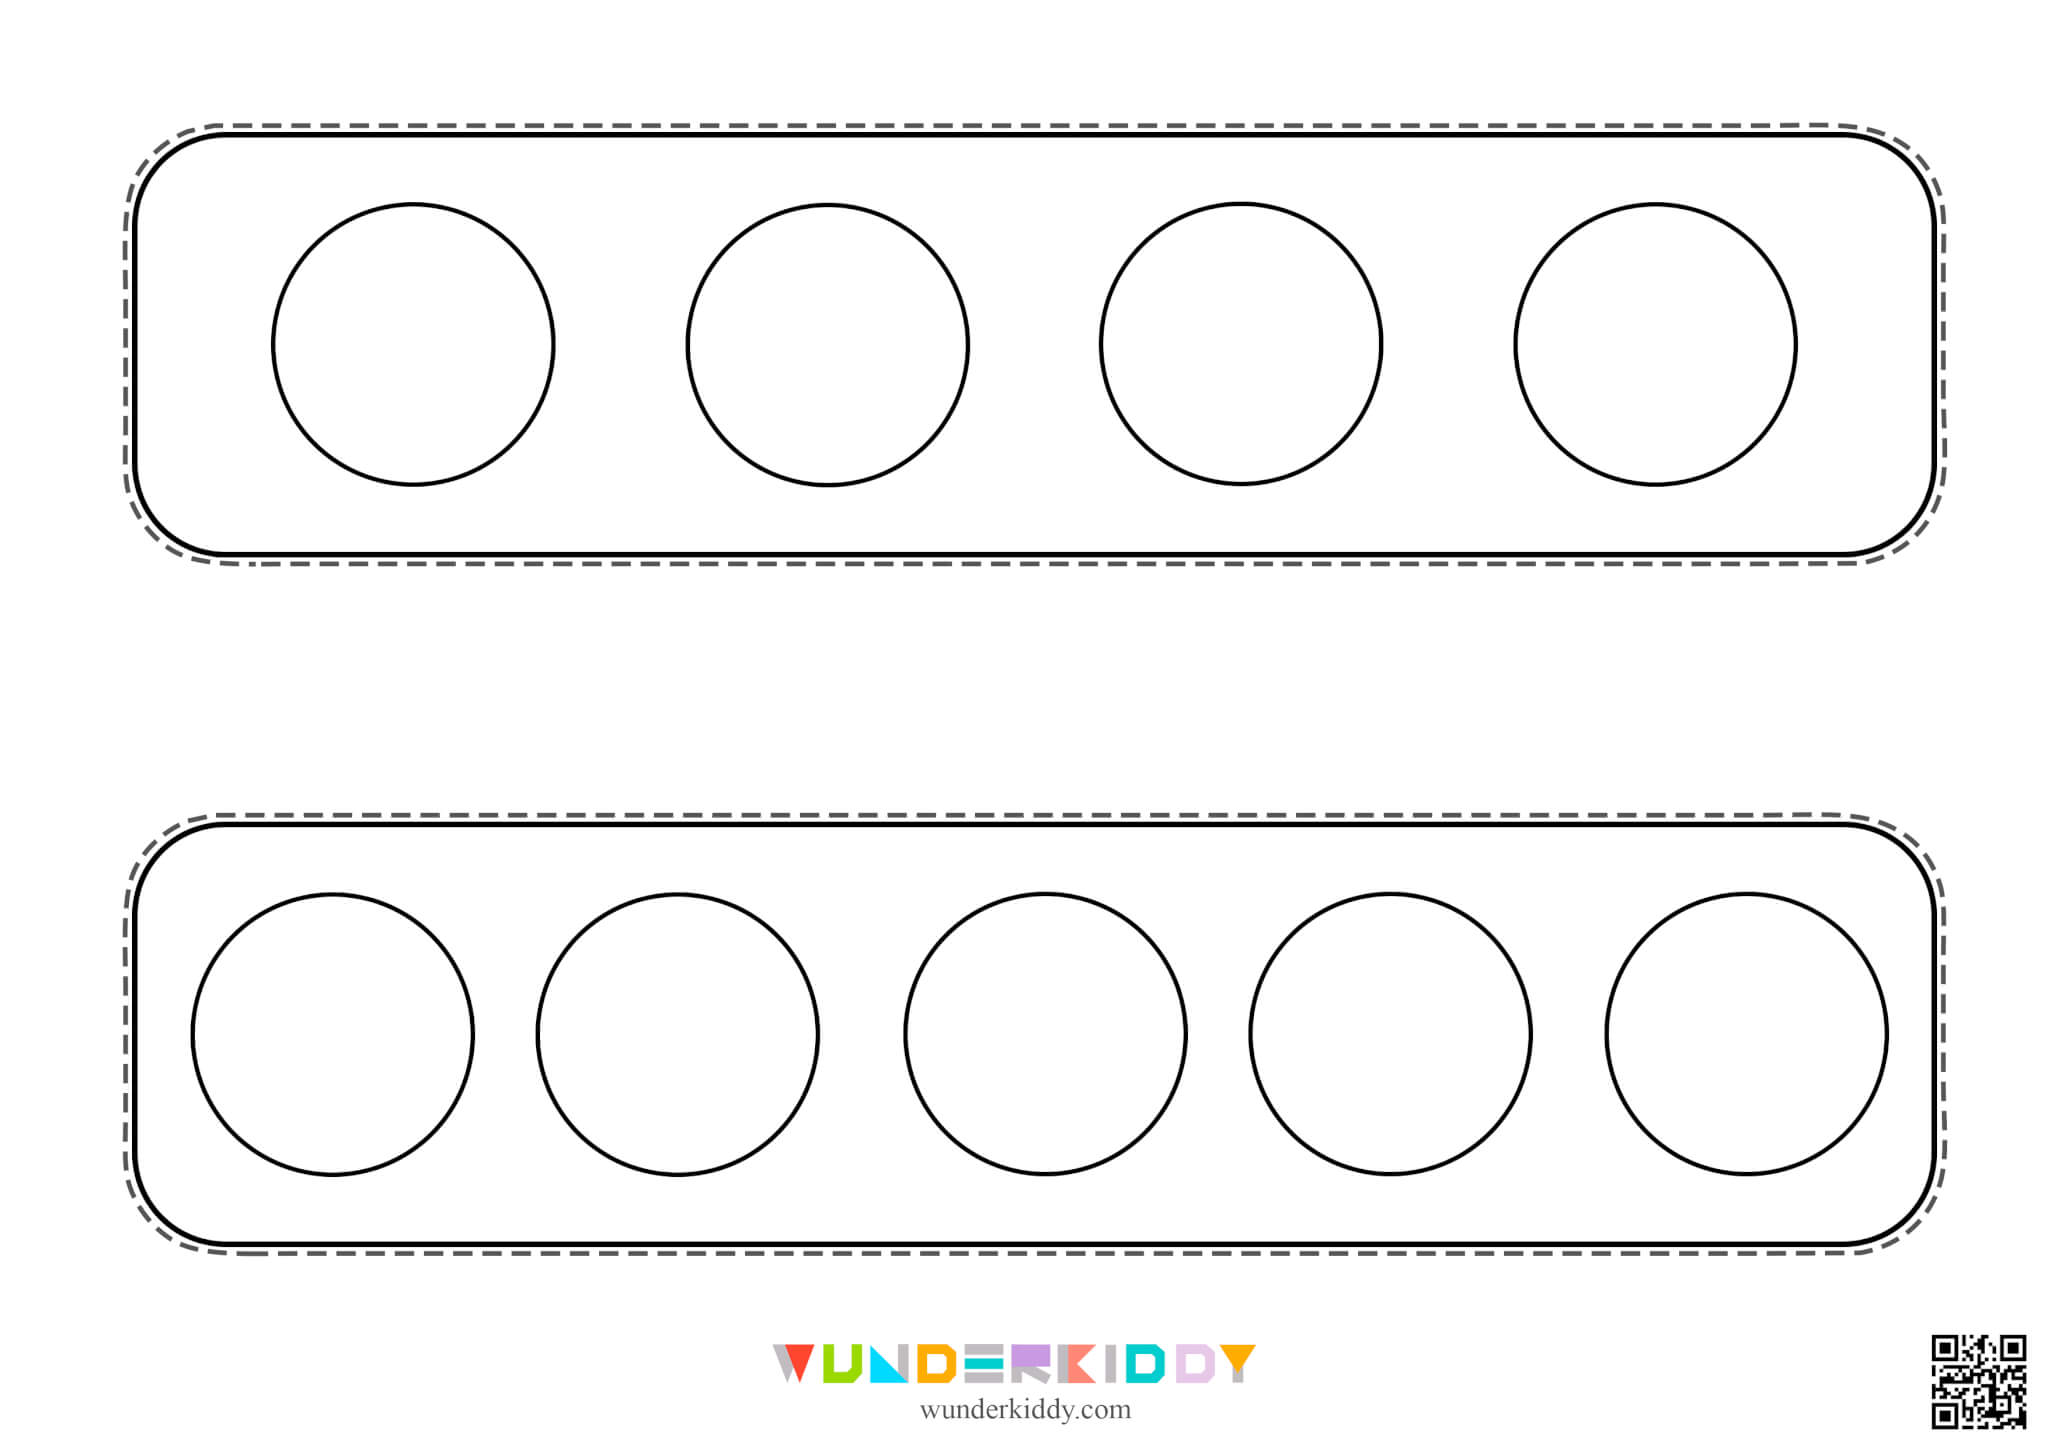 Simple Copy the Pattern Worksheet Multicolored circles - Image 3